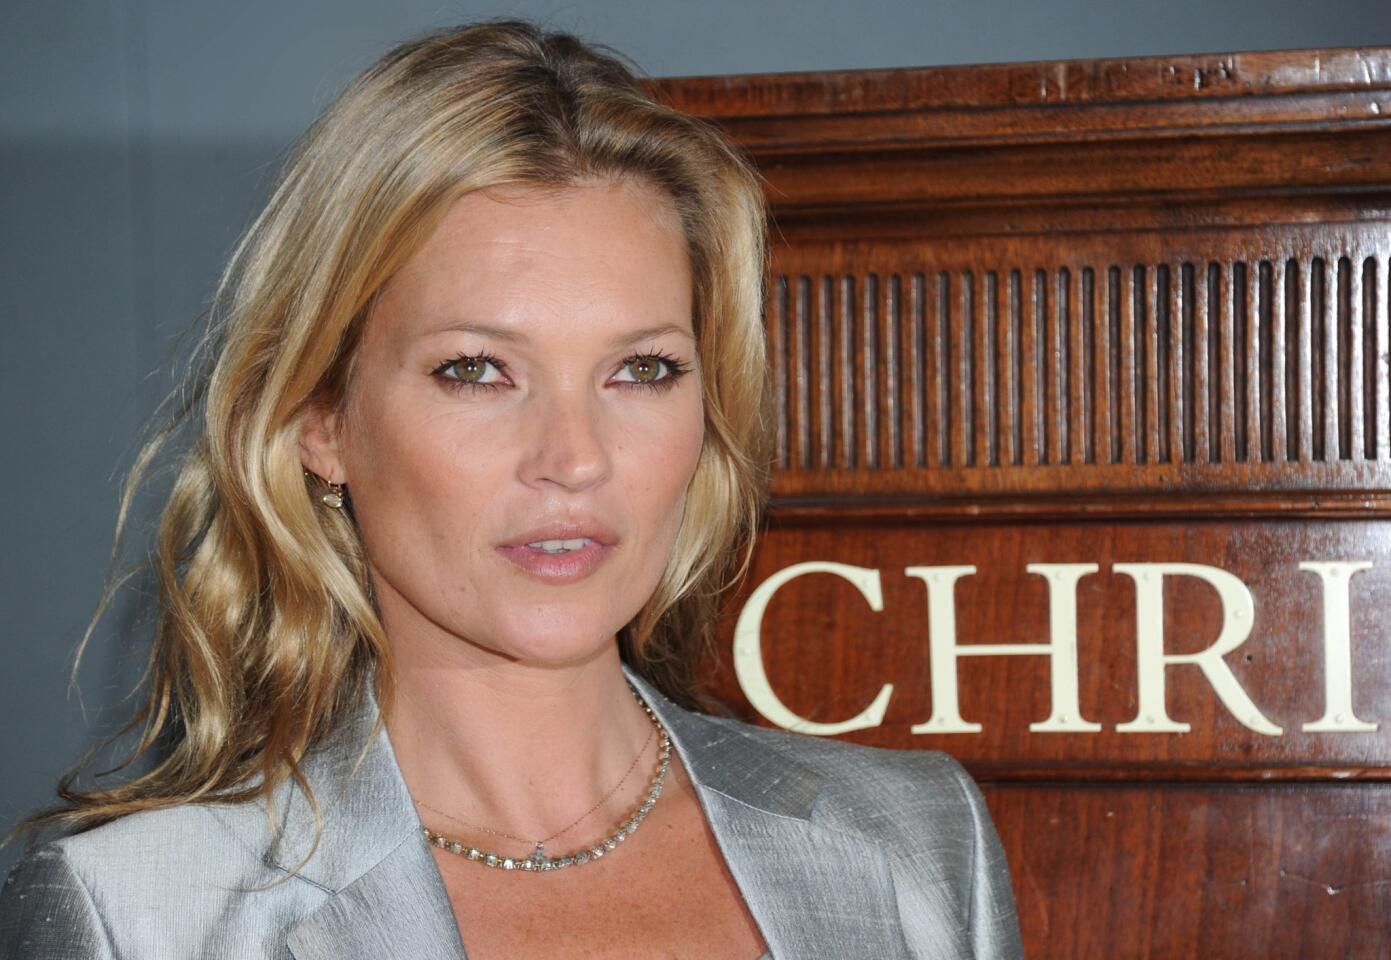 Kate Moss to model nude for Playboy's 60th anniversary issue